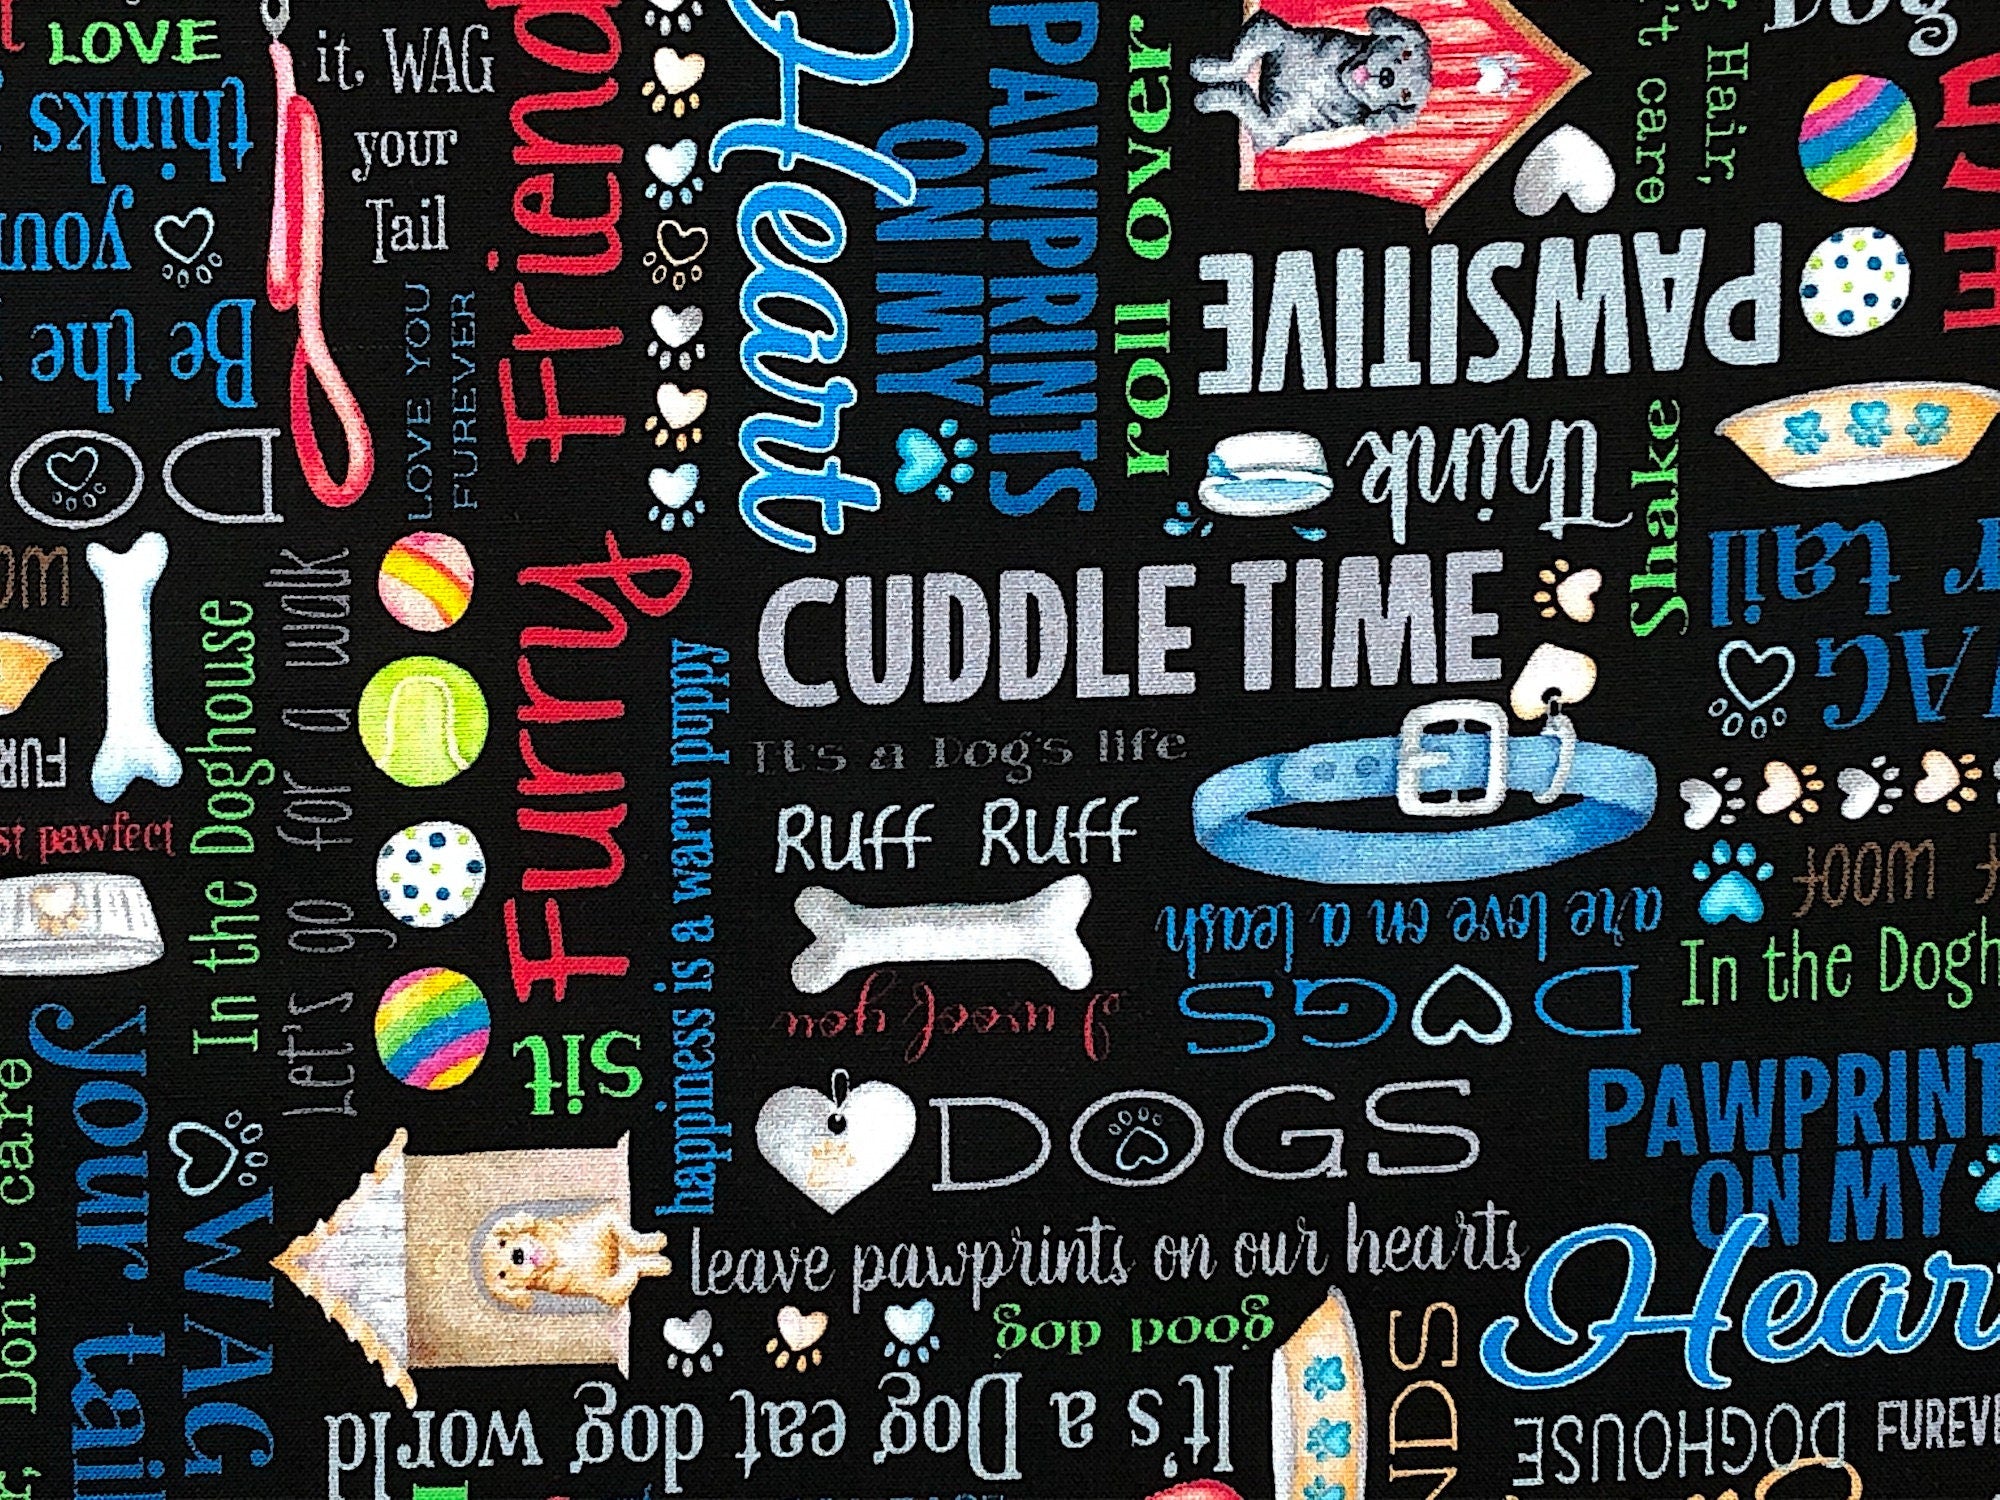 This black fabric is covered with dog sayings such as wag your tail, fetch, life of the dog, hot diggity dog, furry and more.